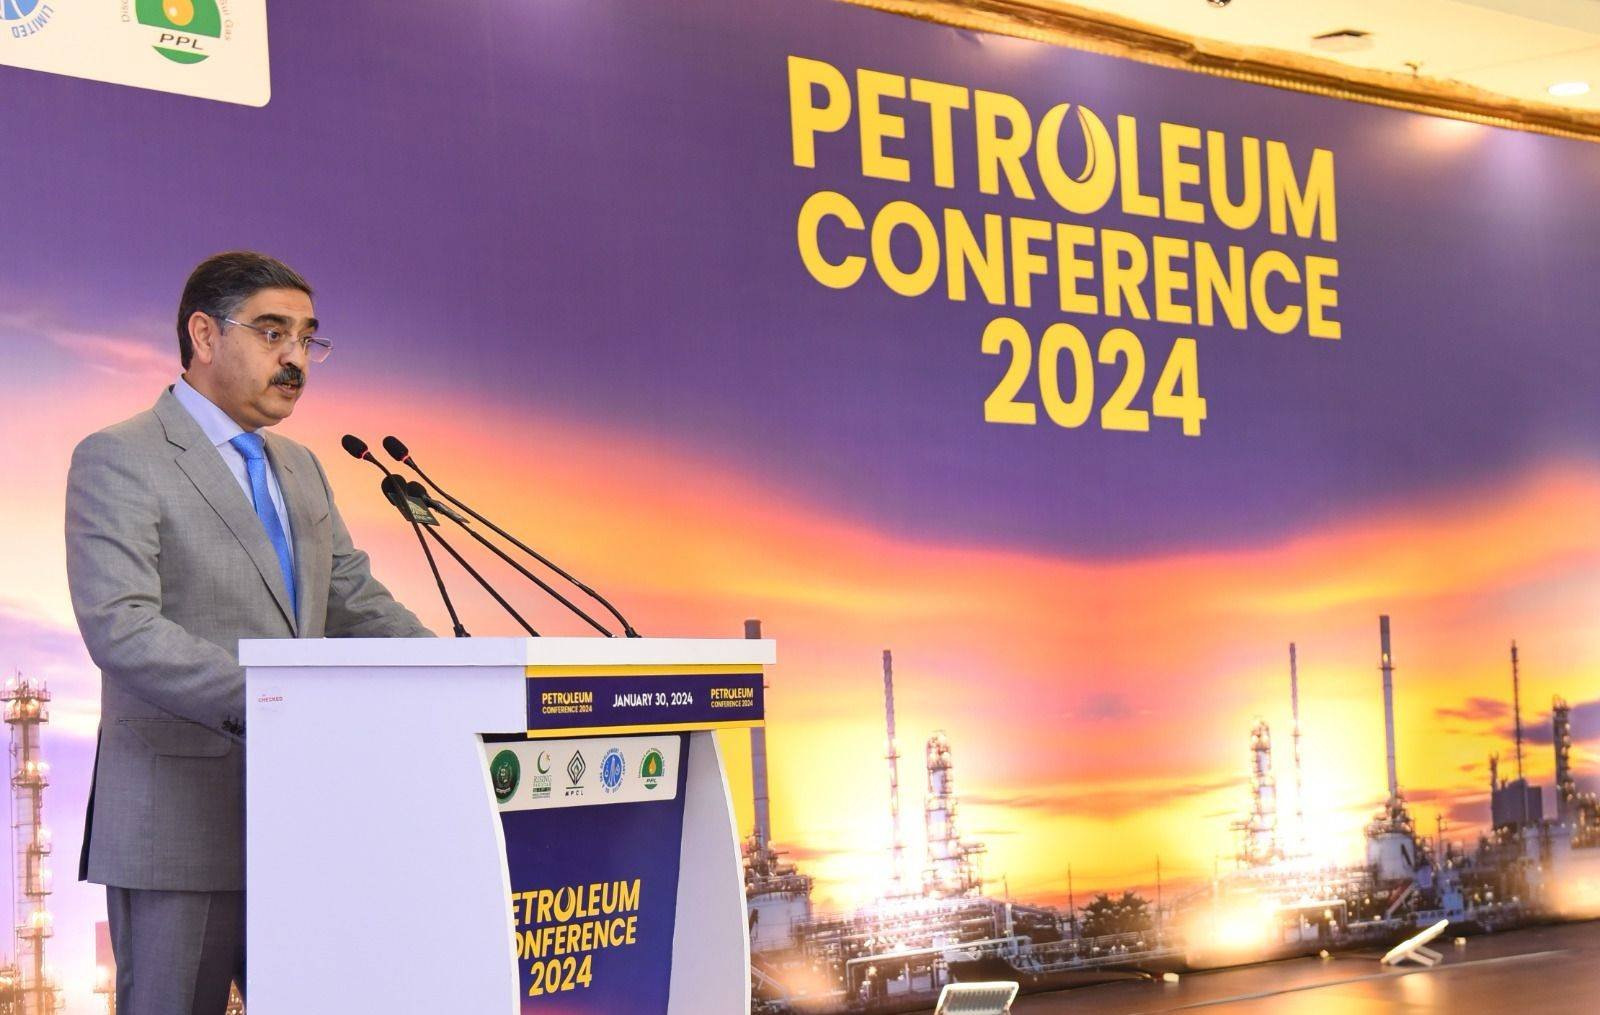 PM Calls For Collaboration On Energy Solutions At Petroleum Conference